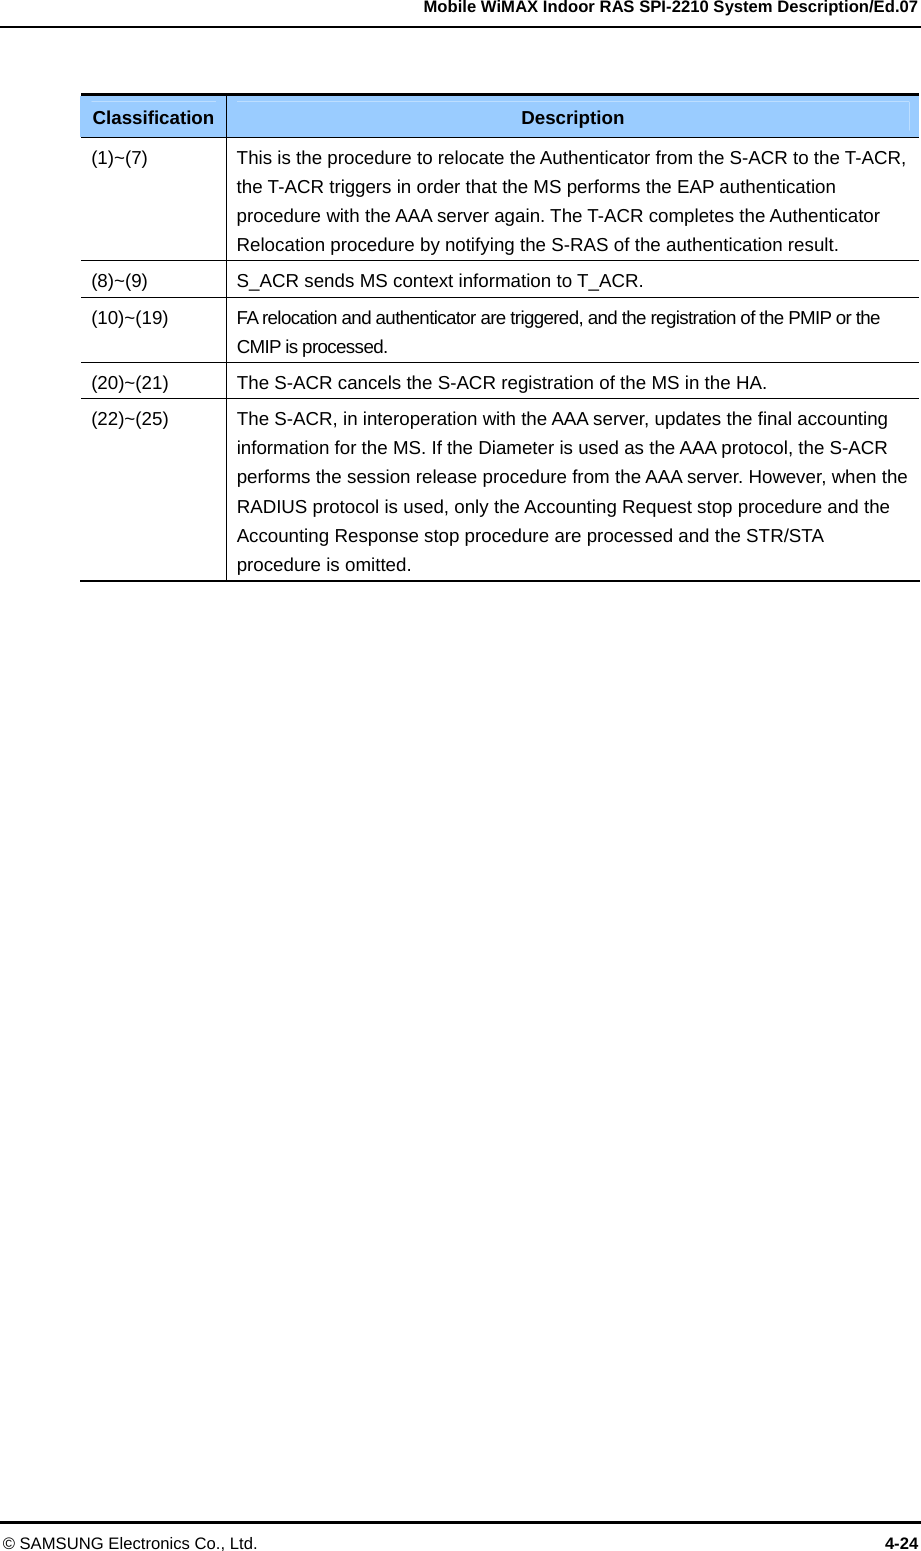   Mobile WiMAX Indoor RAS SPI-2210 System Description/Ed.07 © SAMSUNG Electronics Co., Ltd.  4-24  Classification  Description (1)~(7)  This is the procedure to relocate the Authenticator from the S-ACR to the T-ACR, the T-ACR triggers in order that the MS performs the EAP authentication procedure with the AAA server again. The T-ACR completes the Authenticator Relocation procedure by notifying the S-RAS of the authentication result. (8)~(9)  S_ACR sends MS context information to T_ACR. (10)~(19)  FA relocation and authenticator are triggered, and the registration of the PMIP or the CMIP is processed. (20)~(21)  The S-ACR cancels the S-ACR registration of the MS in the HA.   (22)~(25)  The S-ACR, in interoperation with the AAA server, updates the final accounting information for the MS. If the Diameter is used as the AAA protocol, the S-ACR performs the session release procedure from the AAA server. However, when the RADIUS protocol is used, only the Accounting Request stop procedure and the Accounting Response stop procedure are processed and the STR/STA procedure is omitted.  